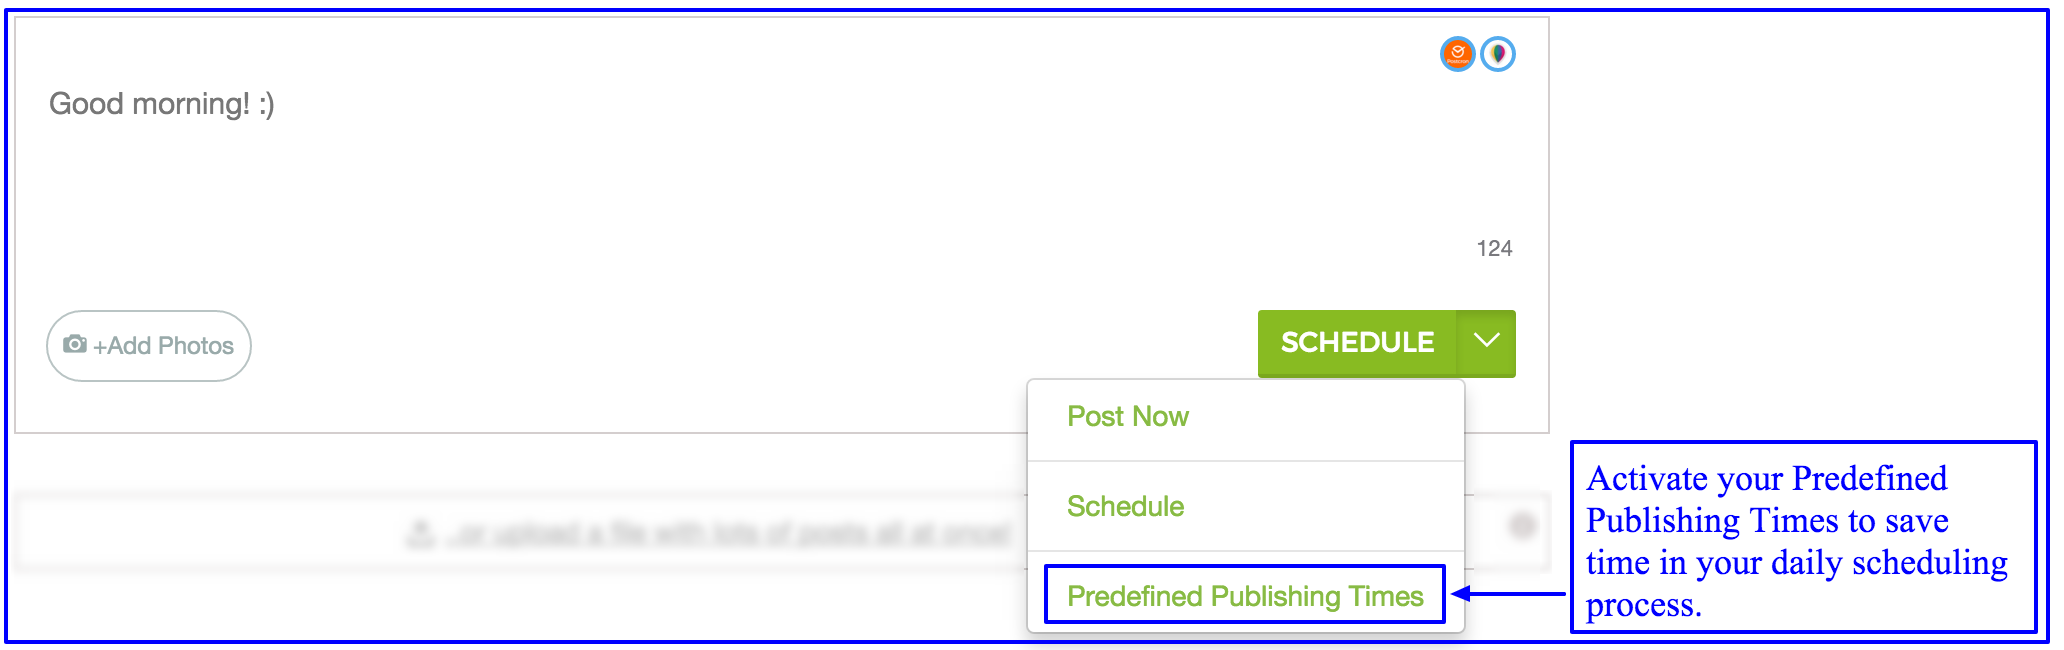 Activate your Predefined Publishing Times to save time